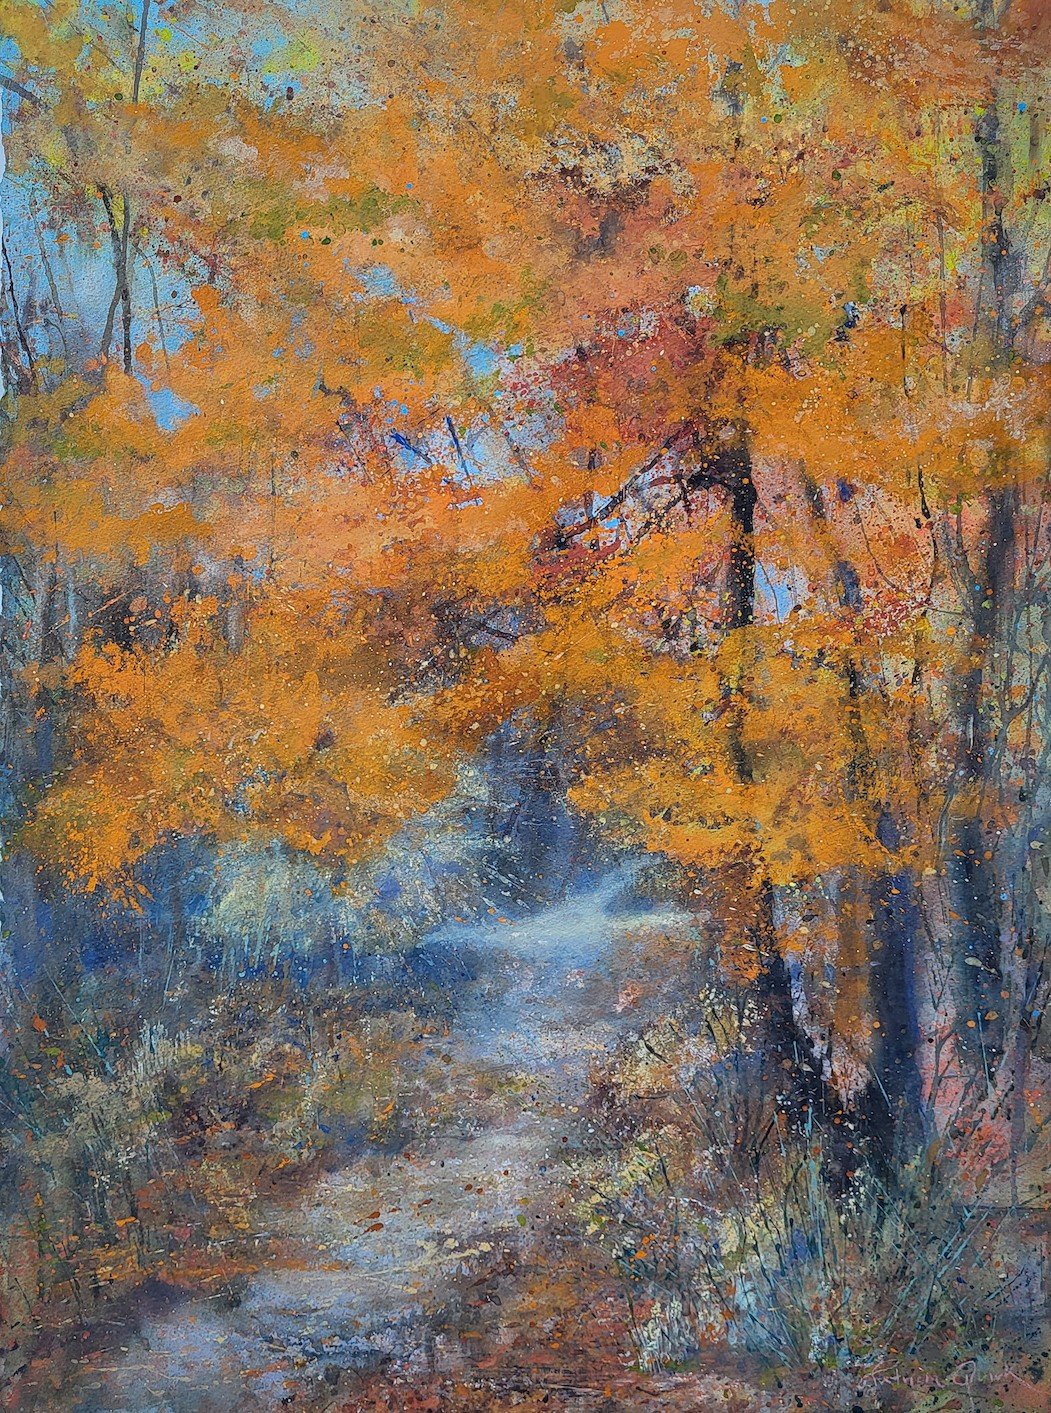 "Autumn Walk," by Patricia Quirk.